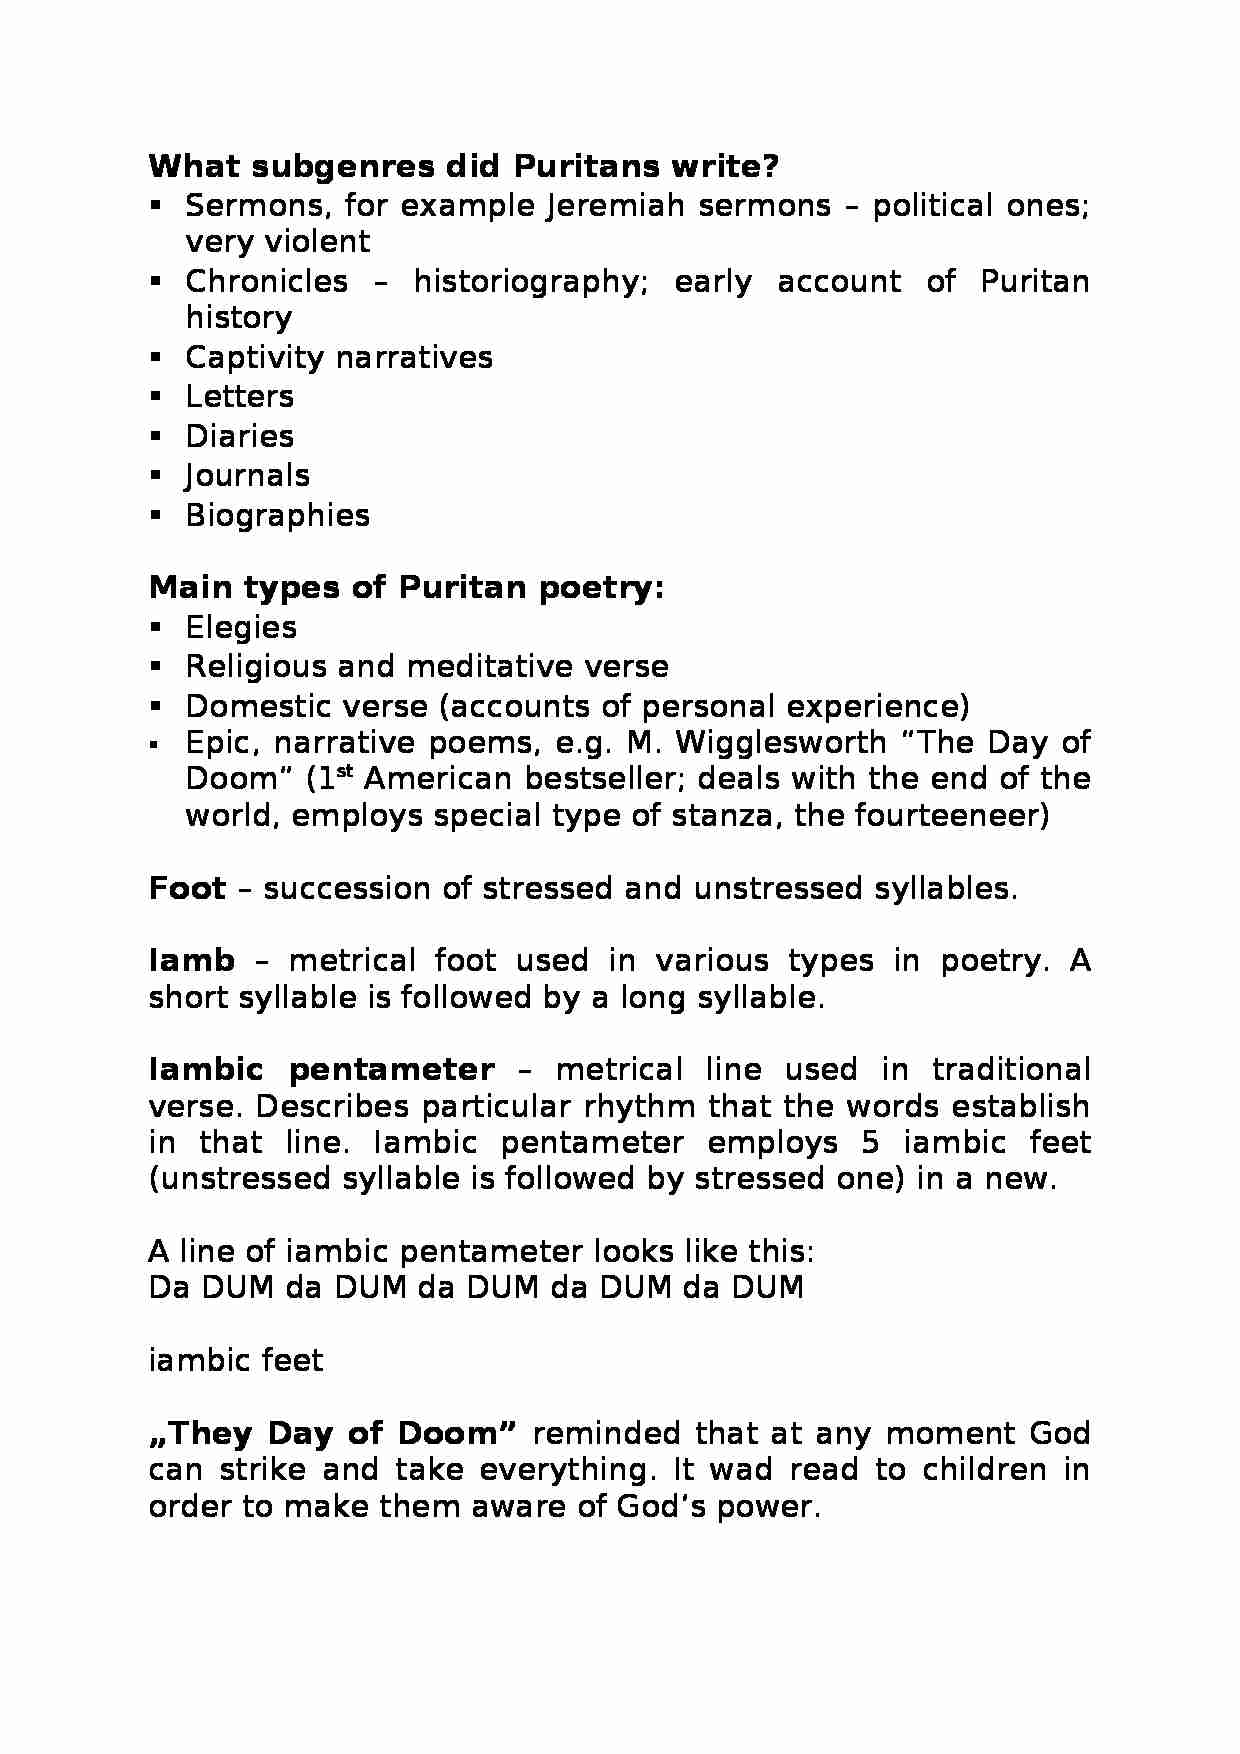 What subgenres did Puritans write-opracowanie - strona 1